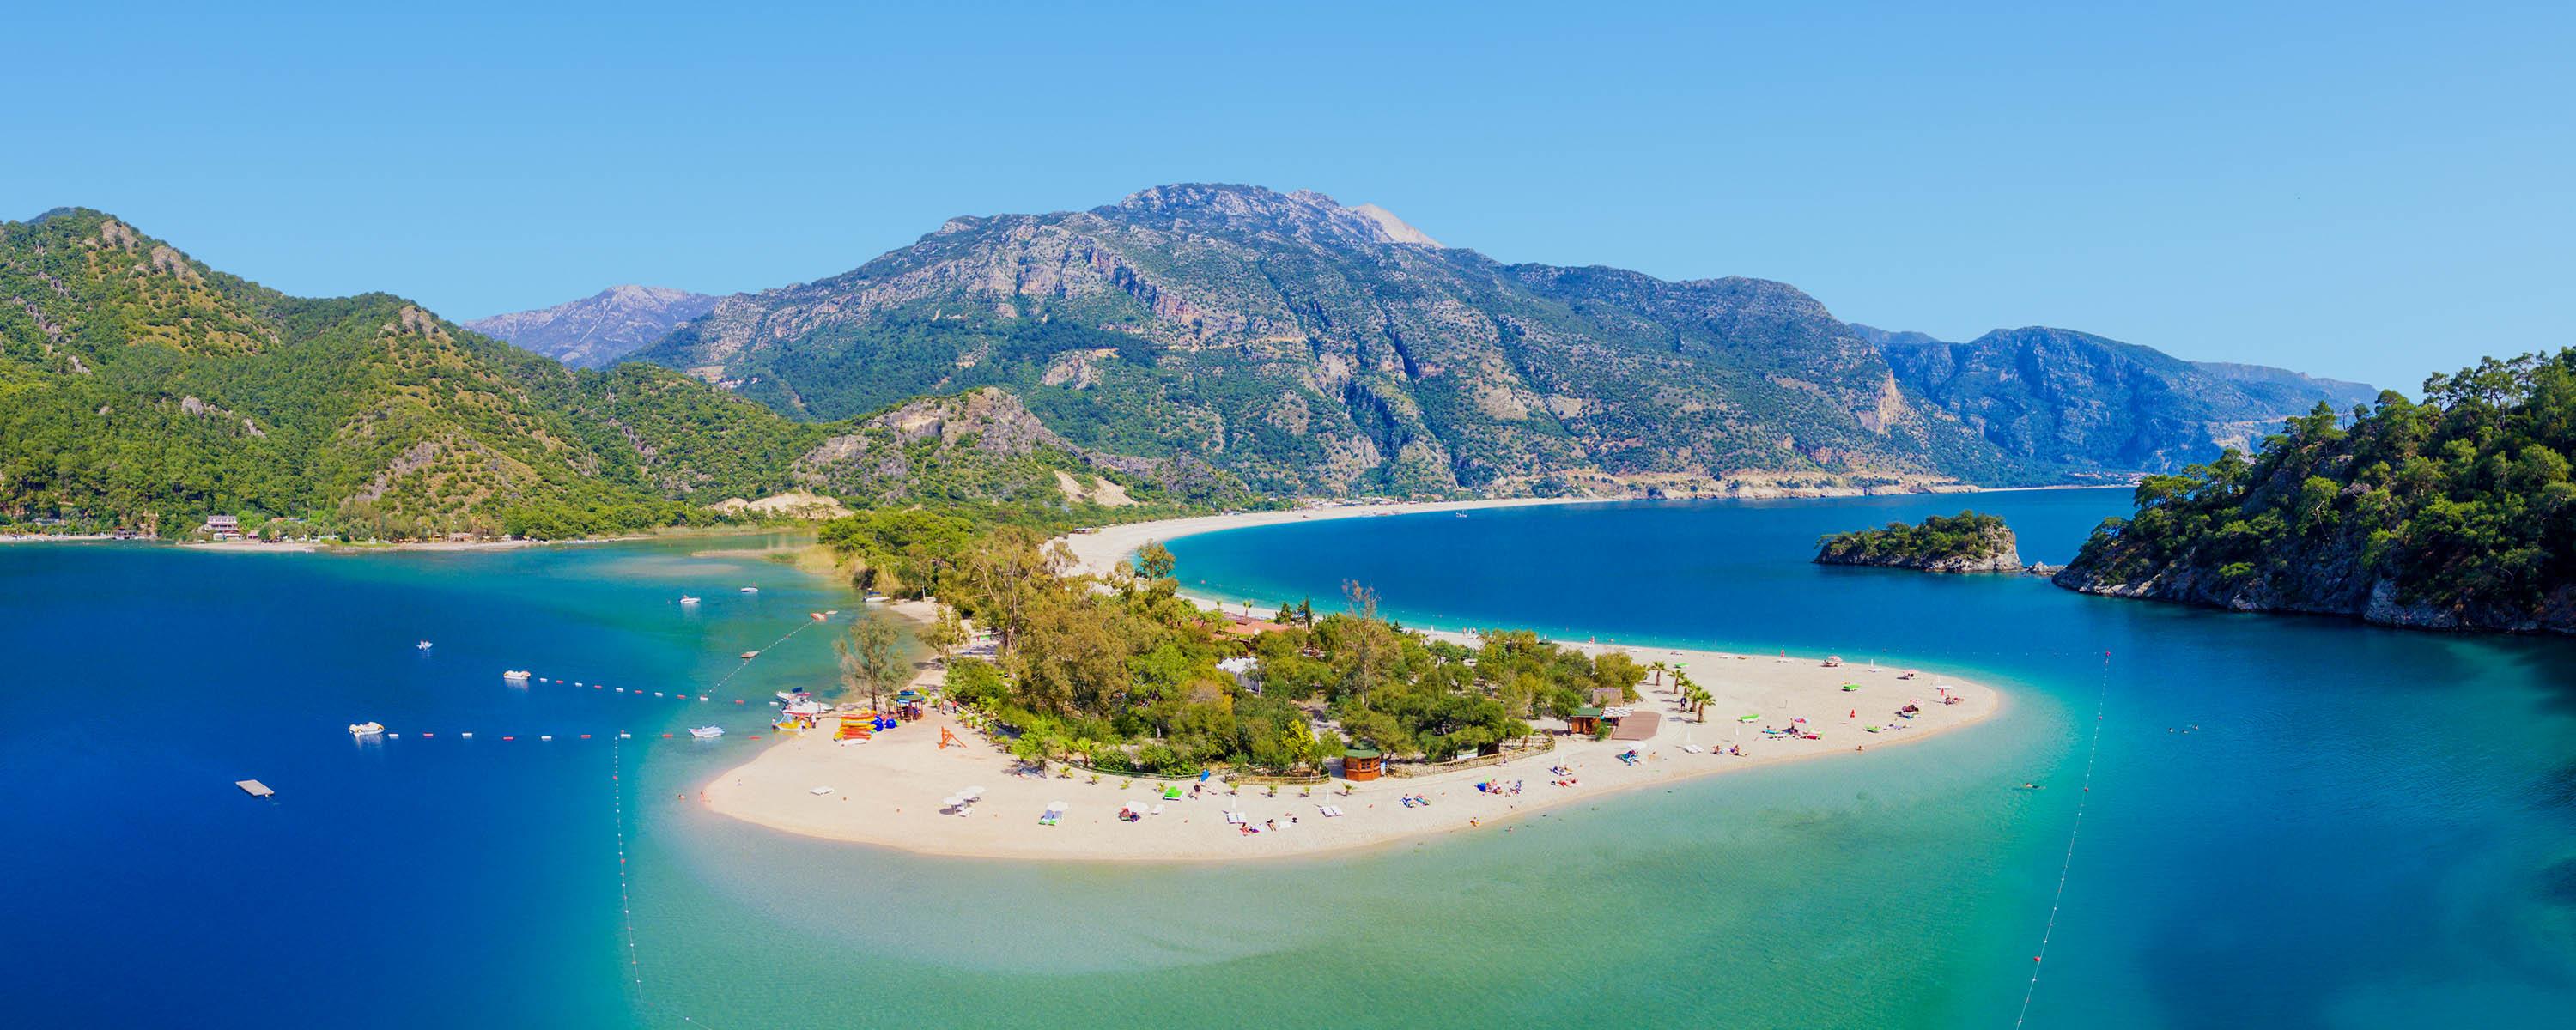 Marmaris in Turkey is the holiday hotspot offering the best value